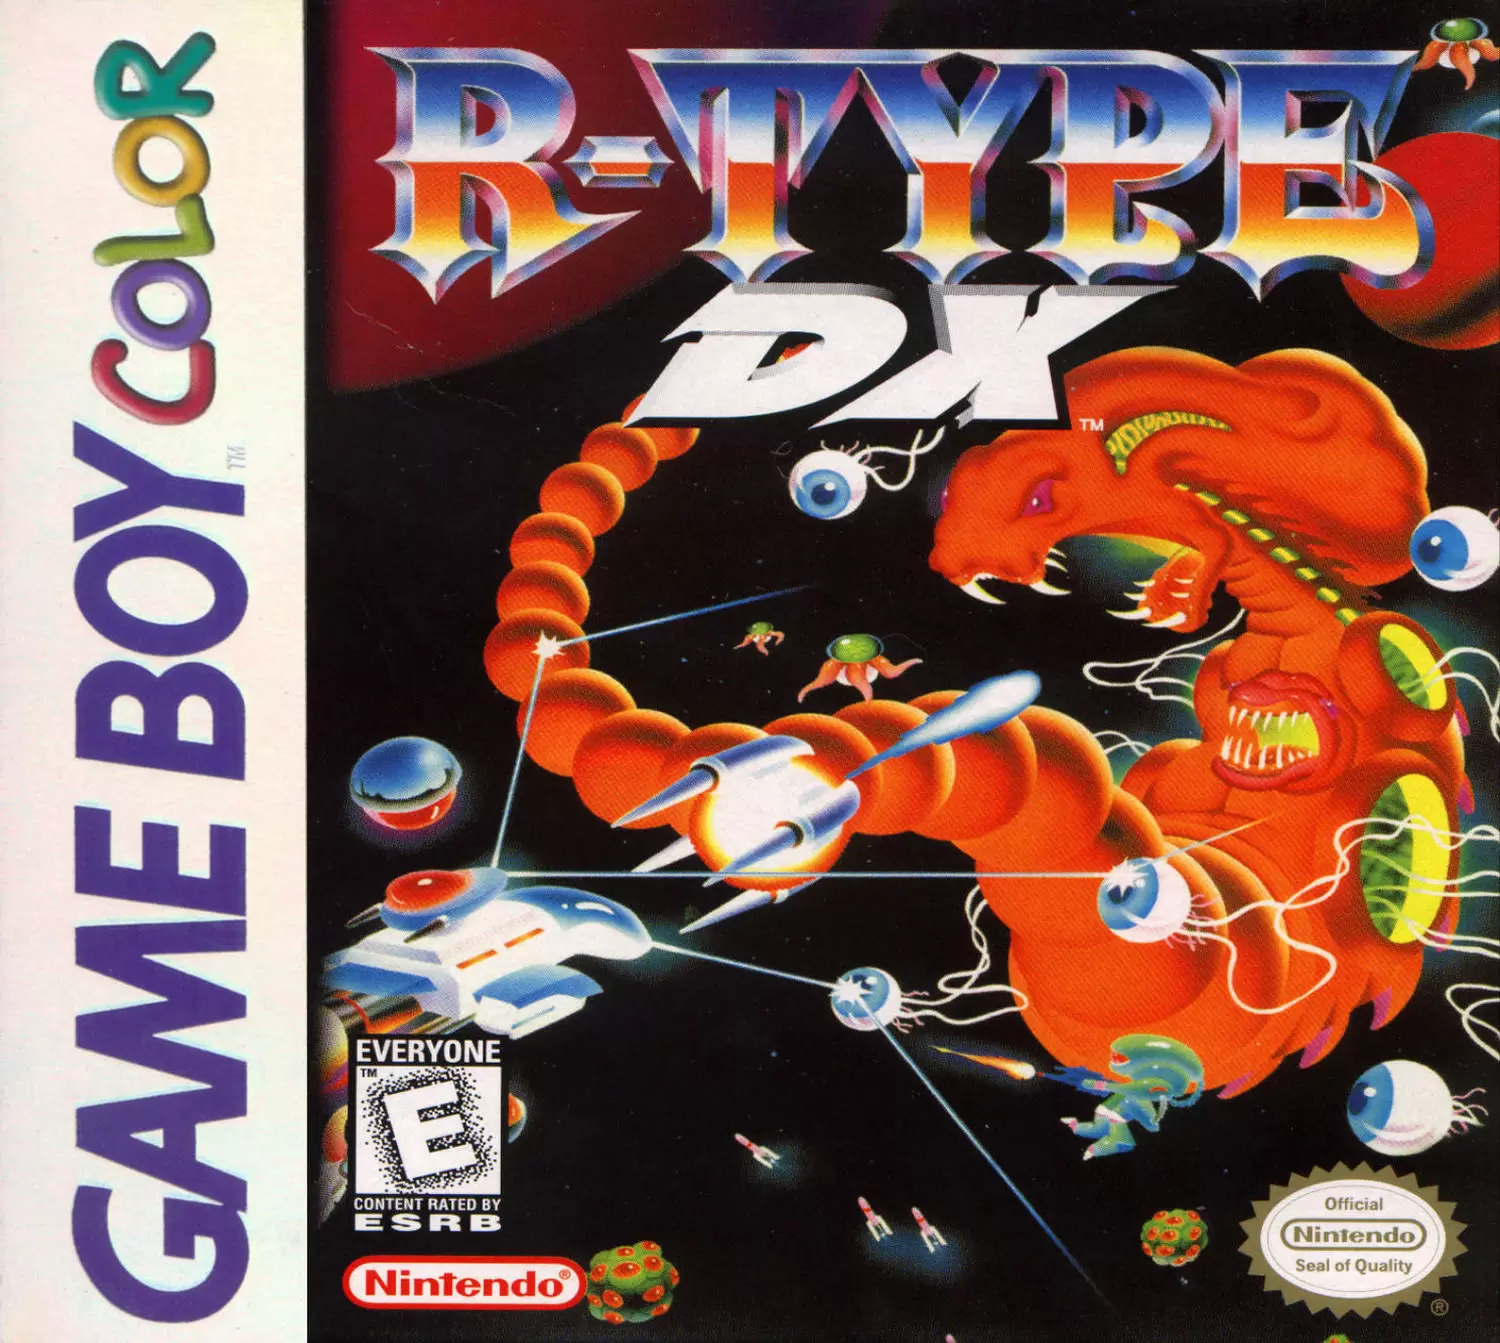 Game Boy Color Games - R-Type DX